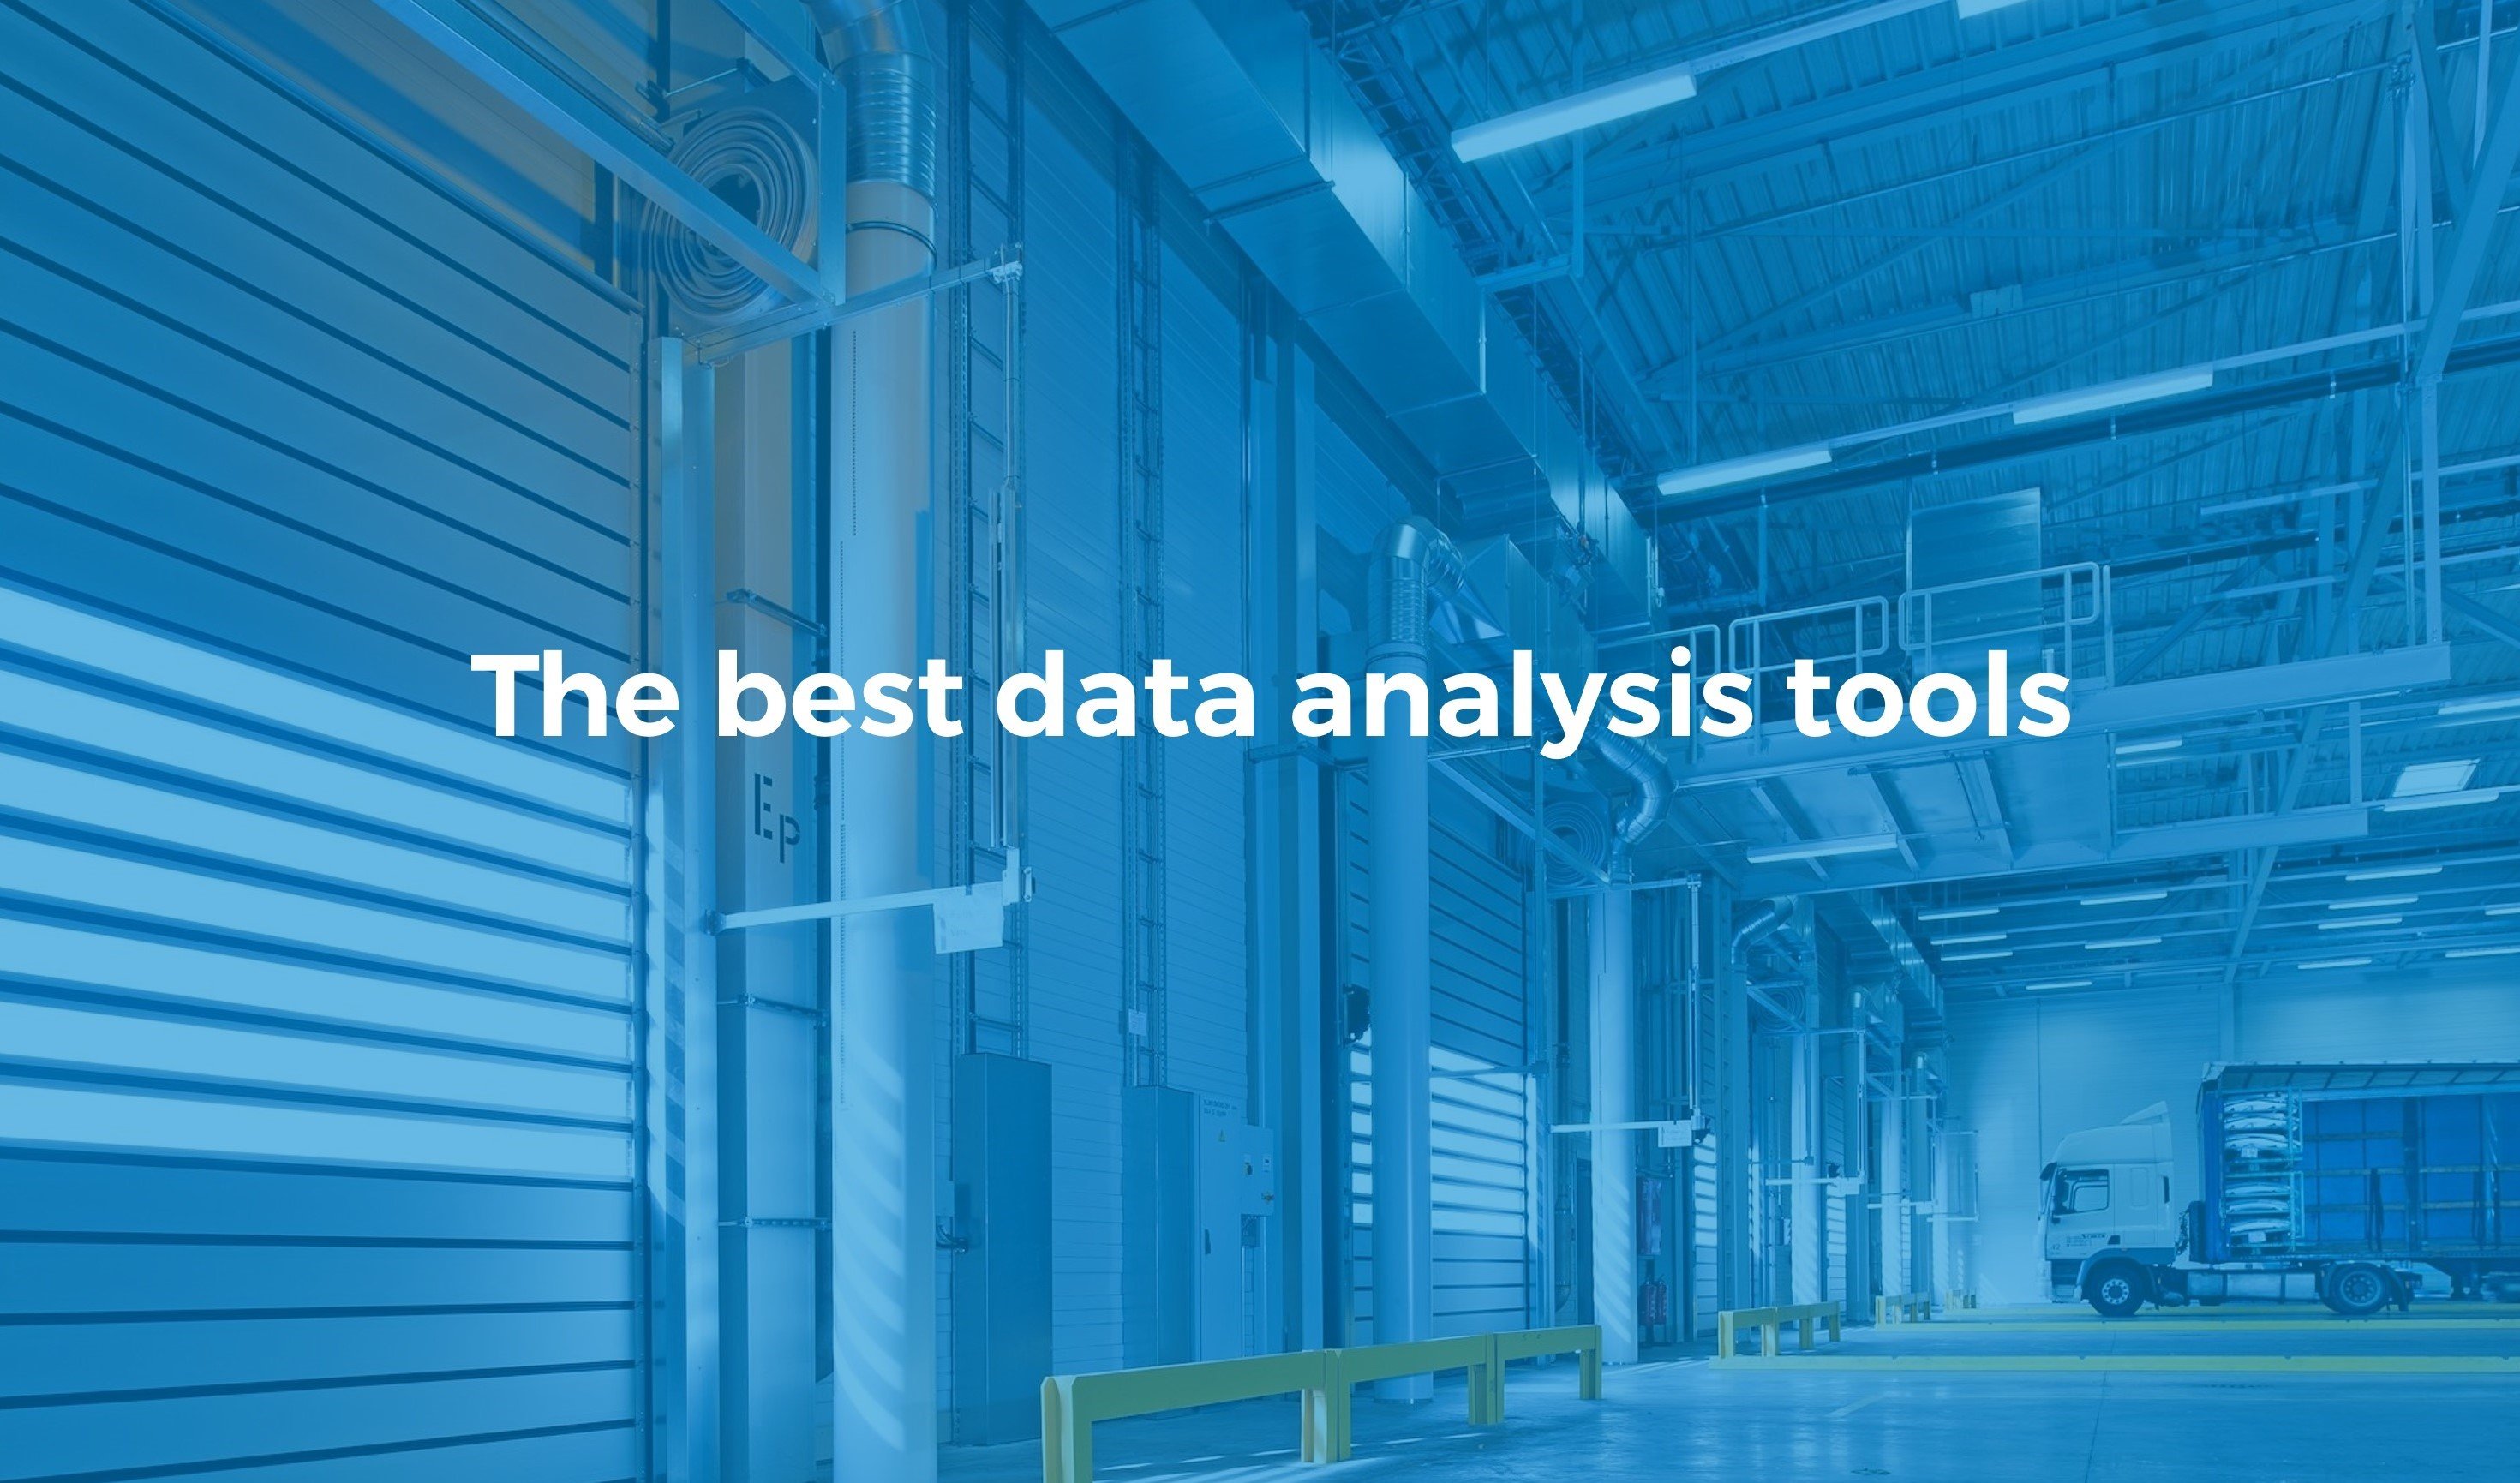 The best data analysis tools for an effective data management